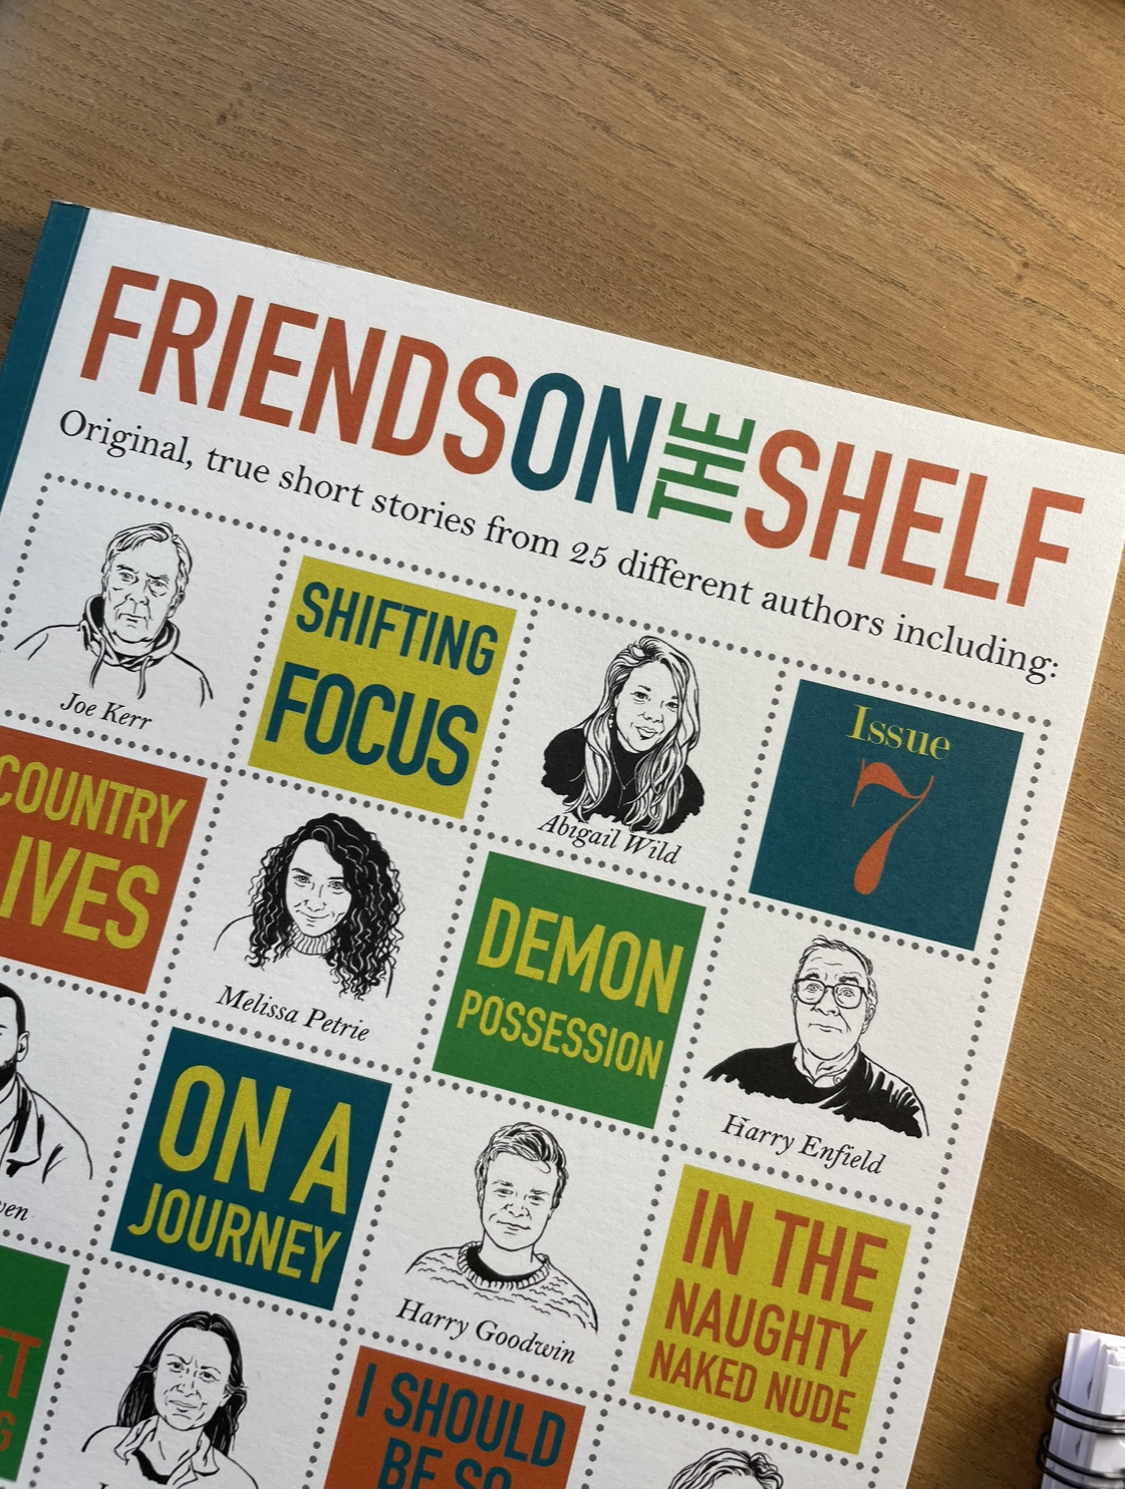 The front cover of a magazine called Friends on the Shelf, showing pen portraits of authors and titles of the short stories inside